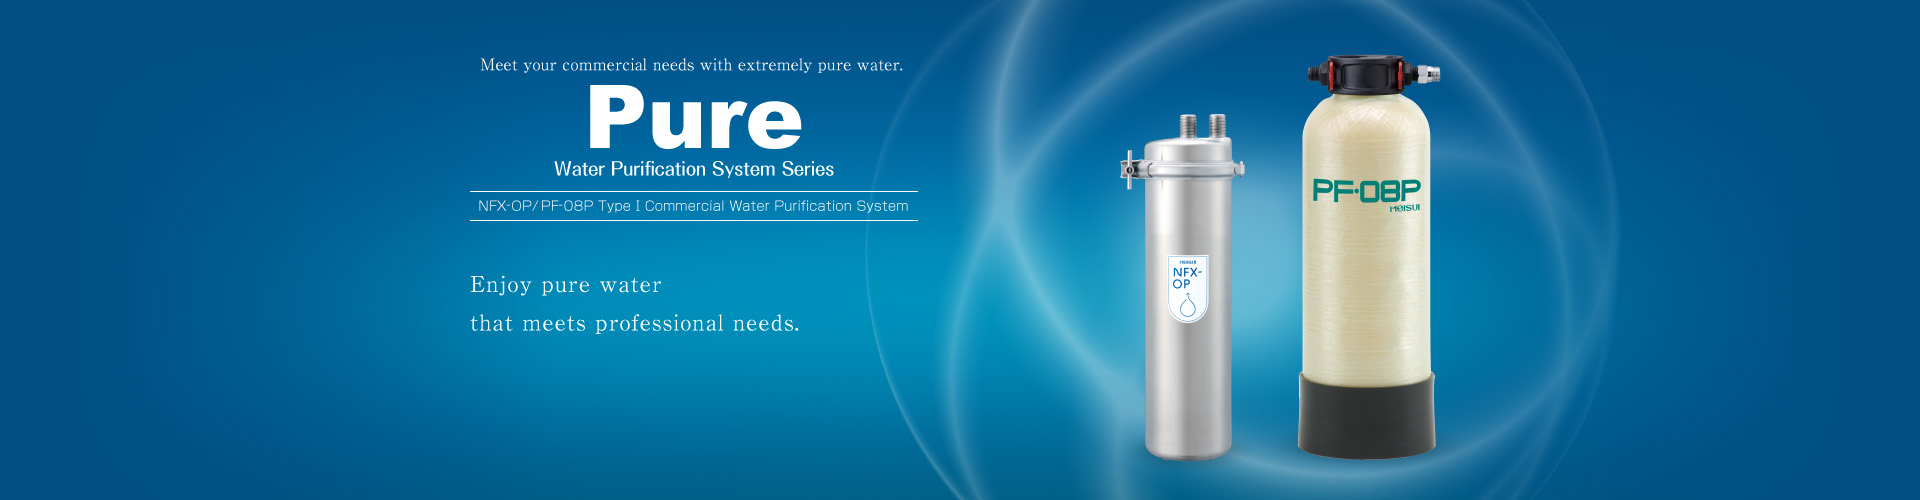 NFX-OP/PF-08P Type I Commercial Water Purification System